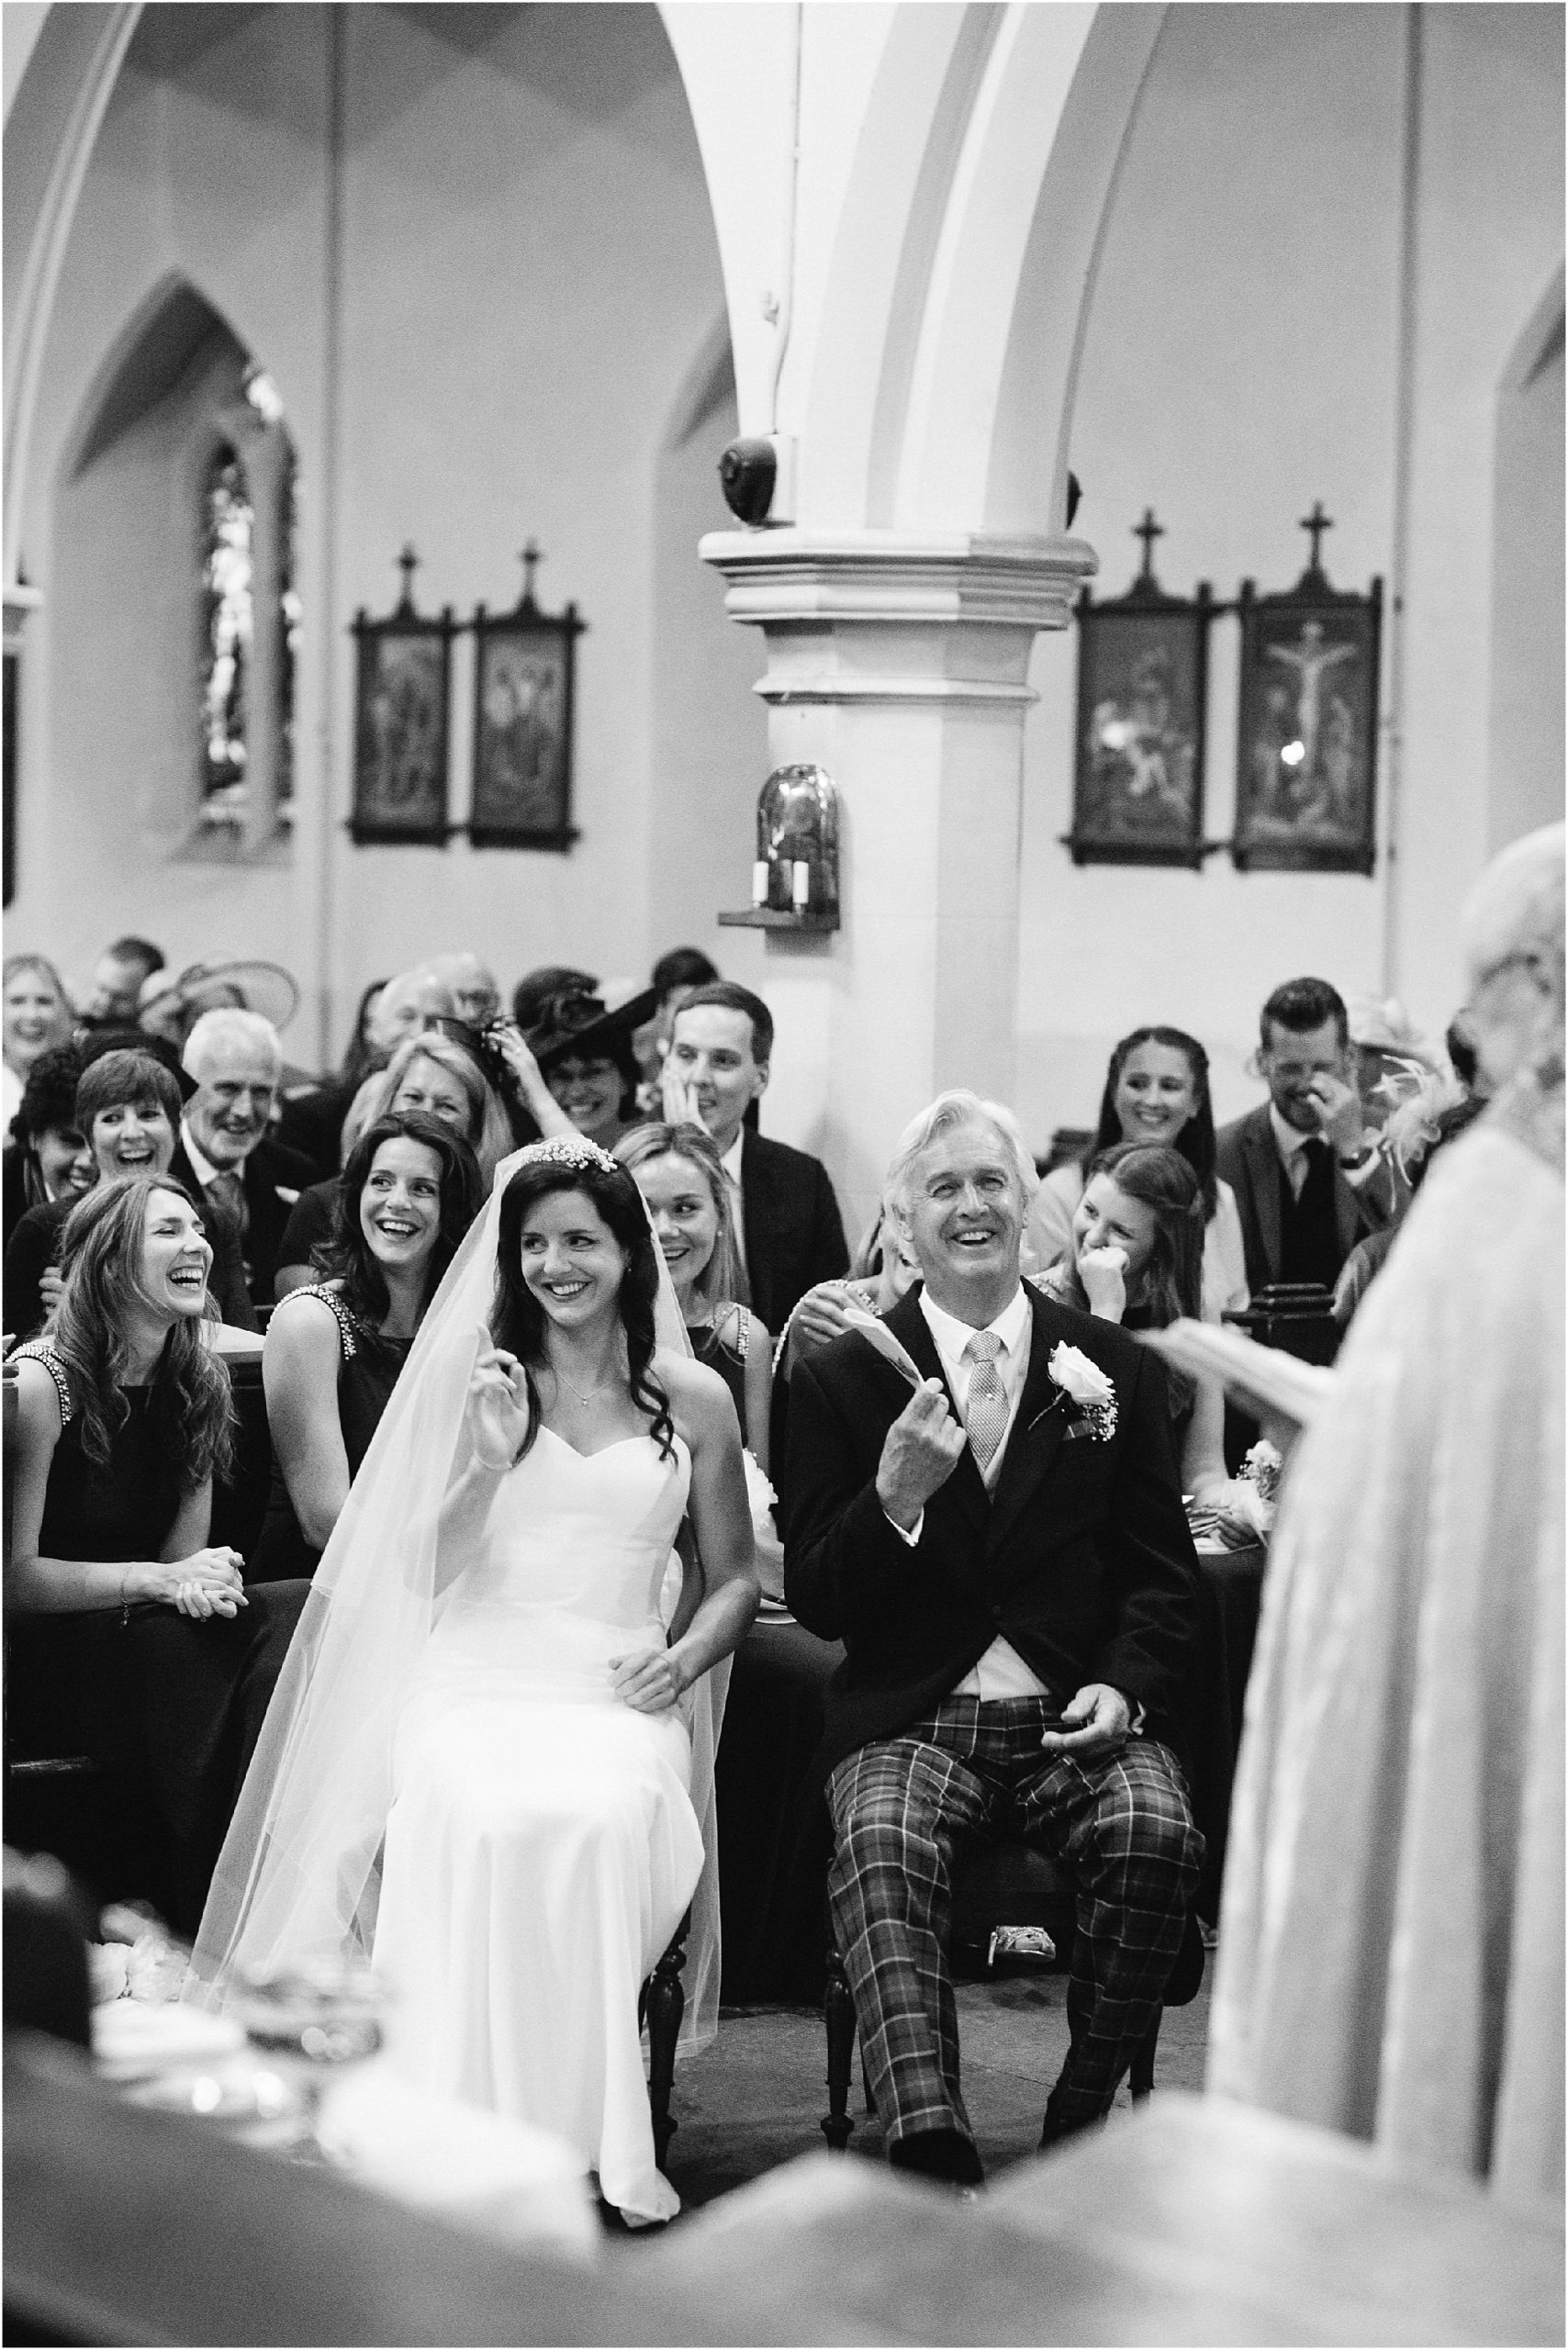 Wedding party laughing during church wedding ceremony